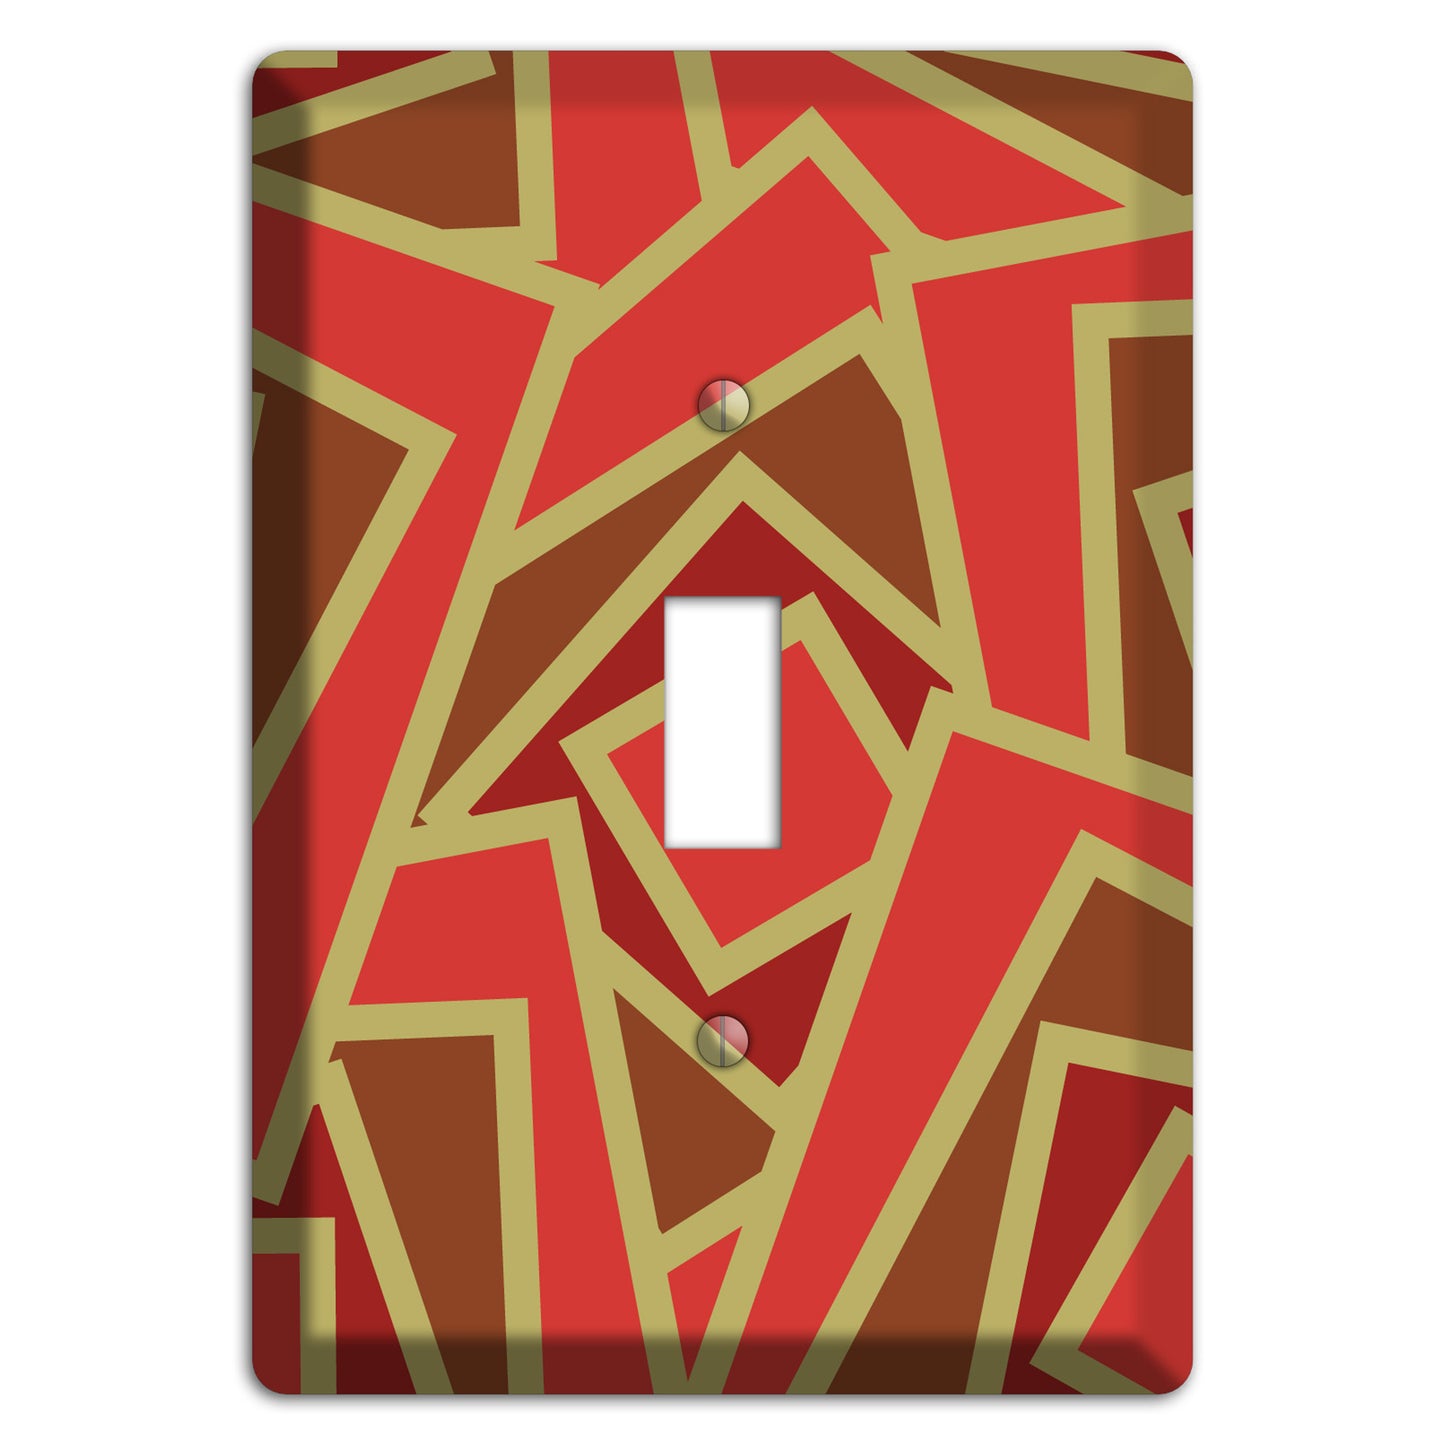 Red and Brown Retro Cubist Cover Plates